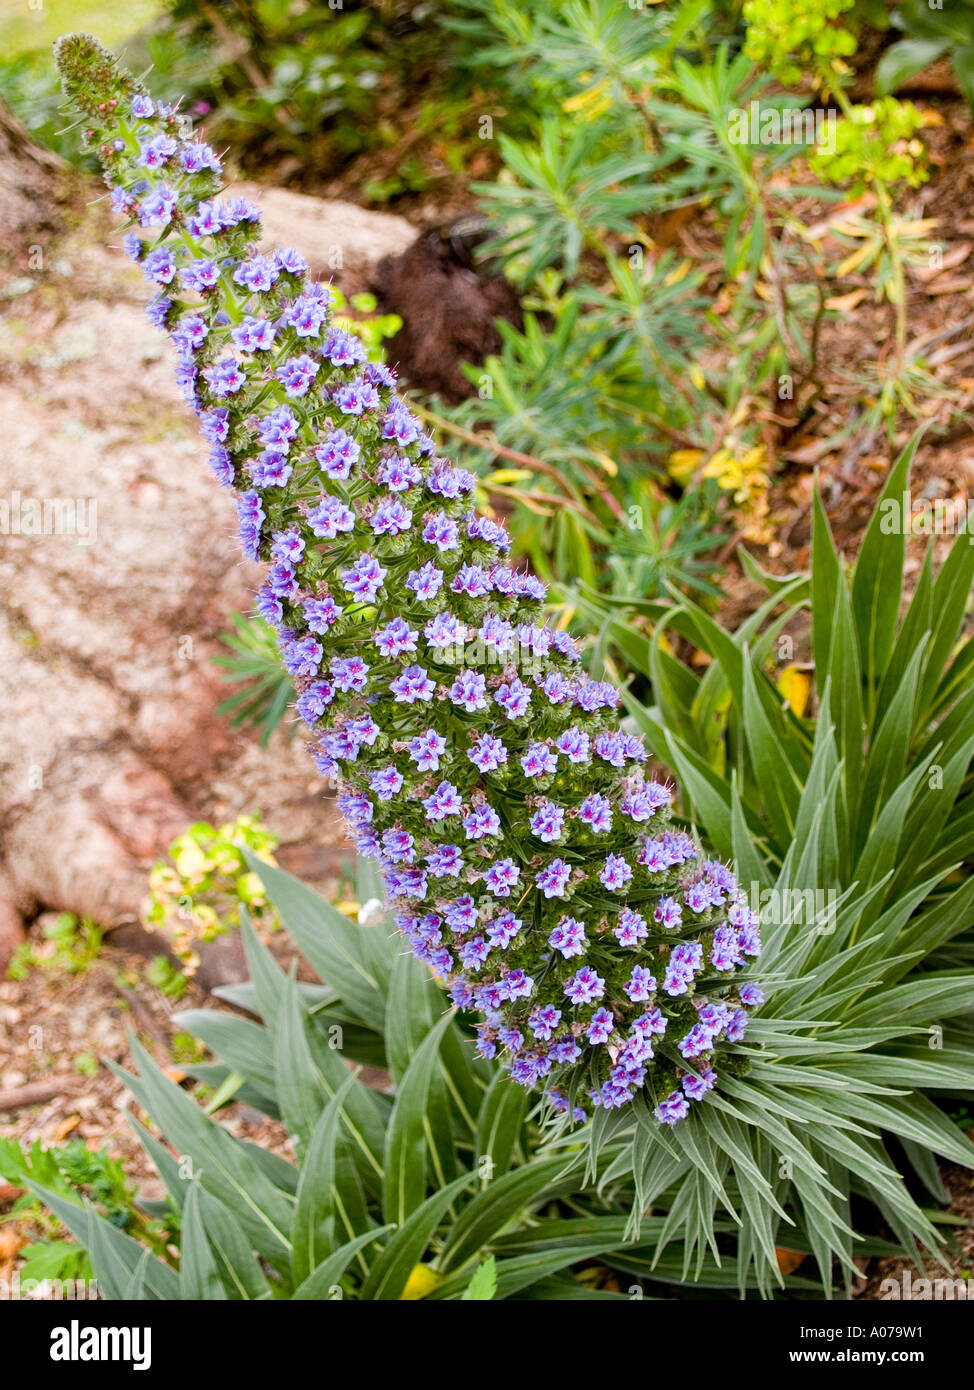 Echium Hybrid Cultivar blue and red flowered foxtail lily or desert candle Liliaceae Stock Photo